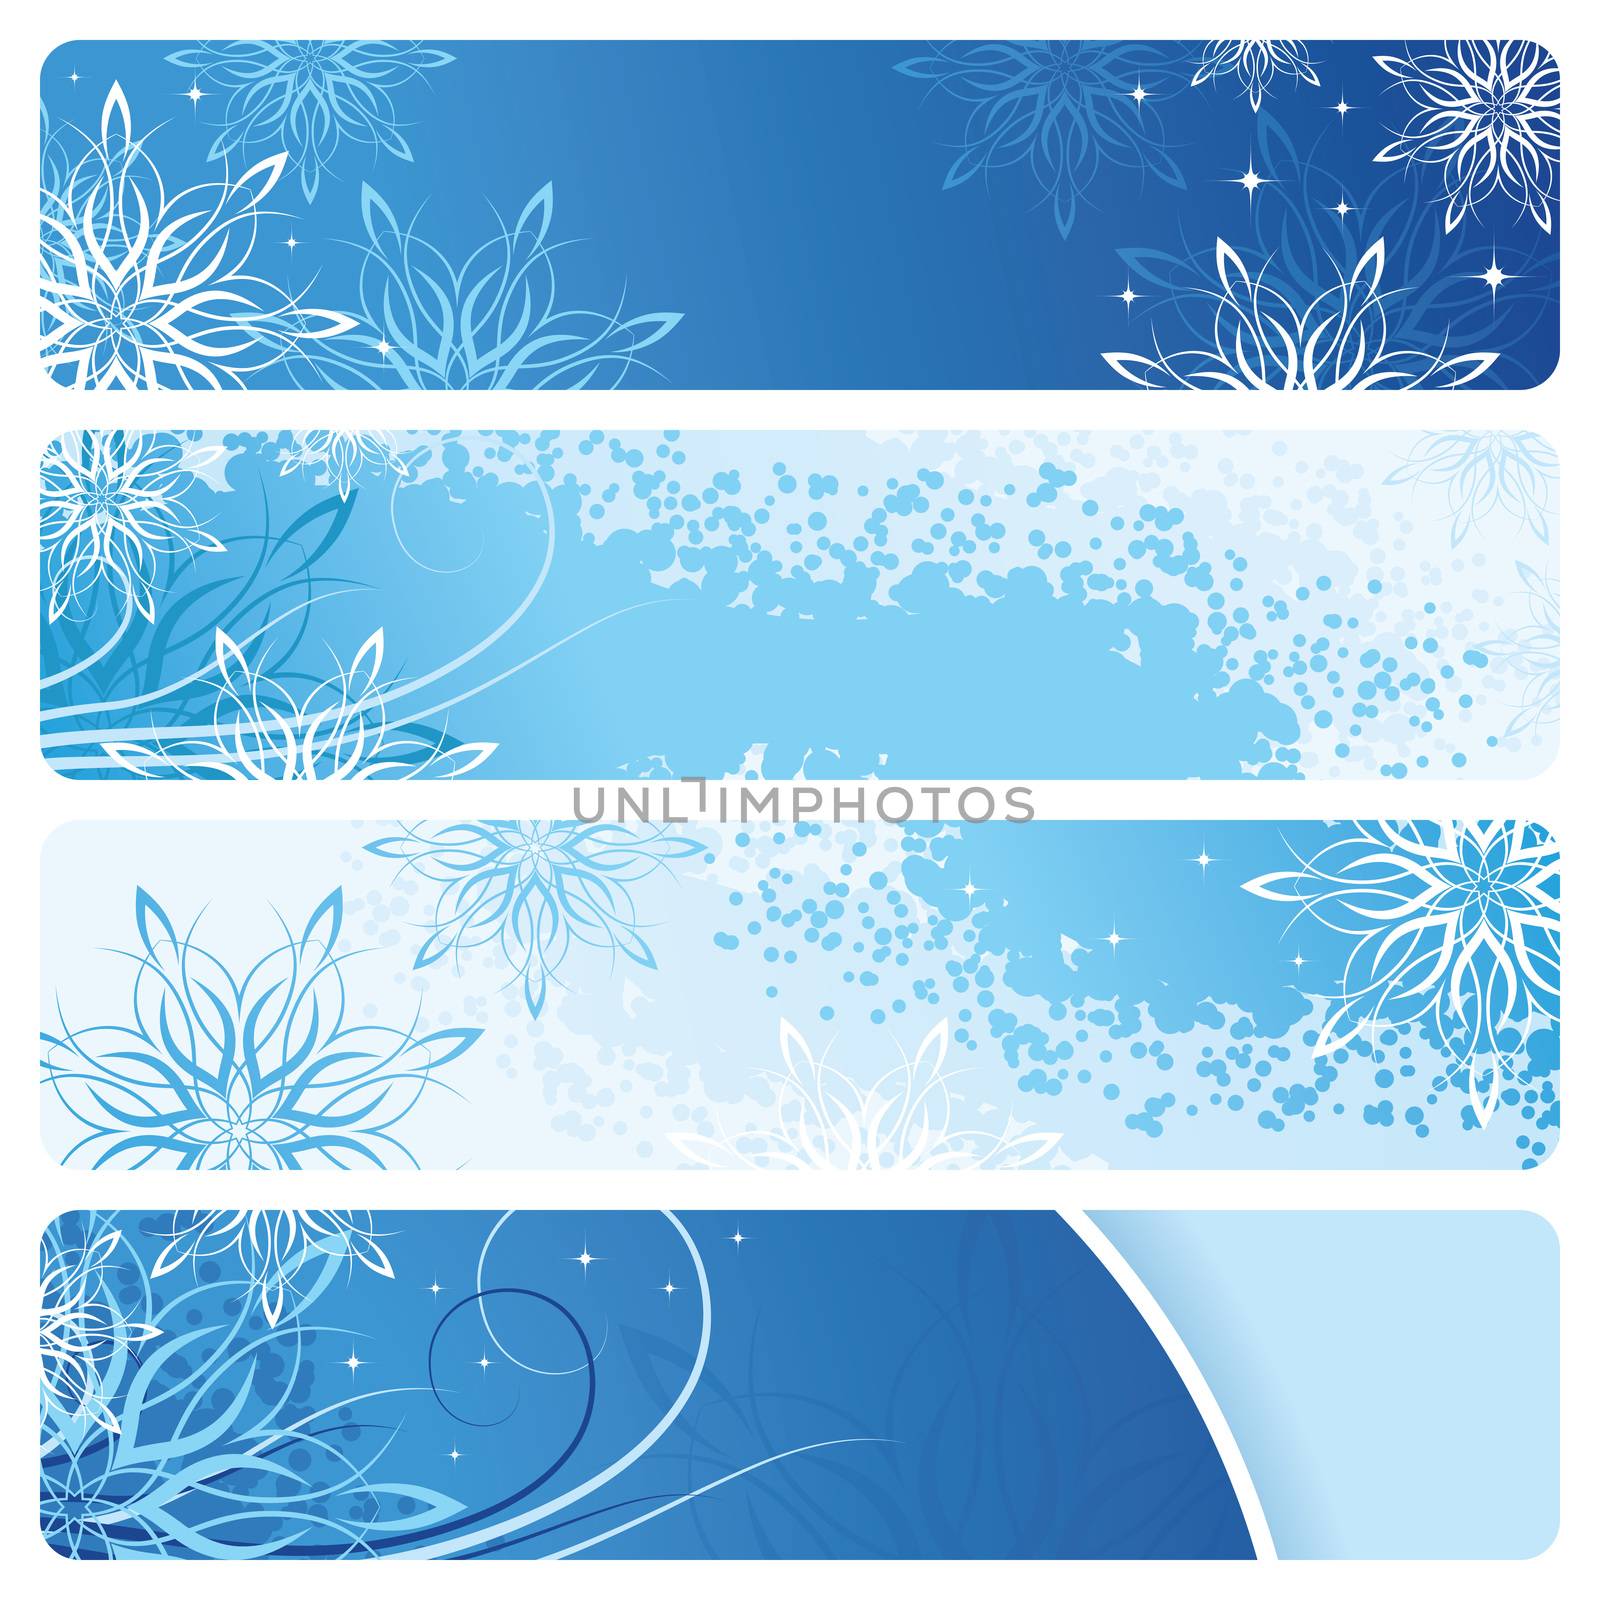 Blue winter banners with snowflakes and scrolls